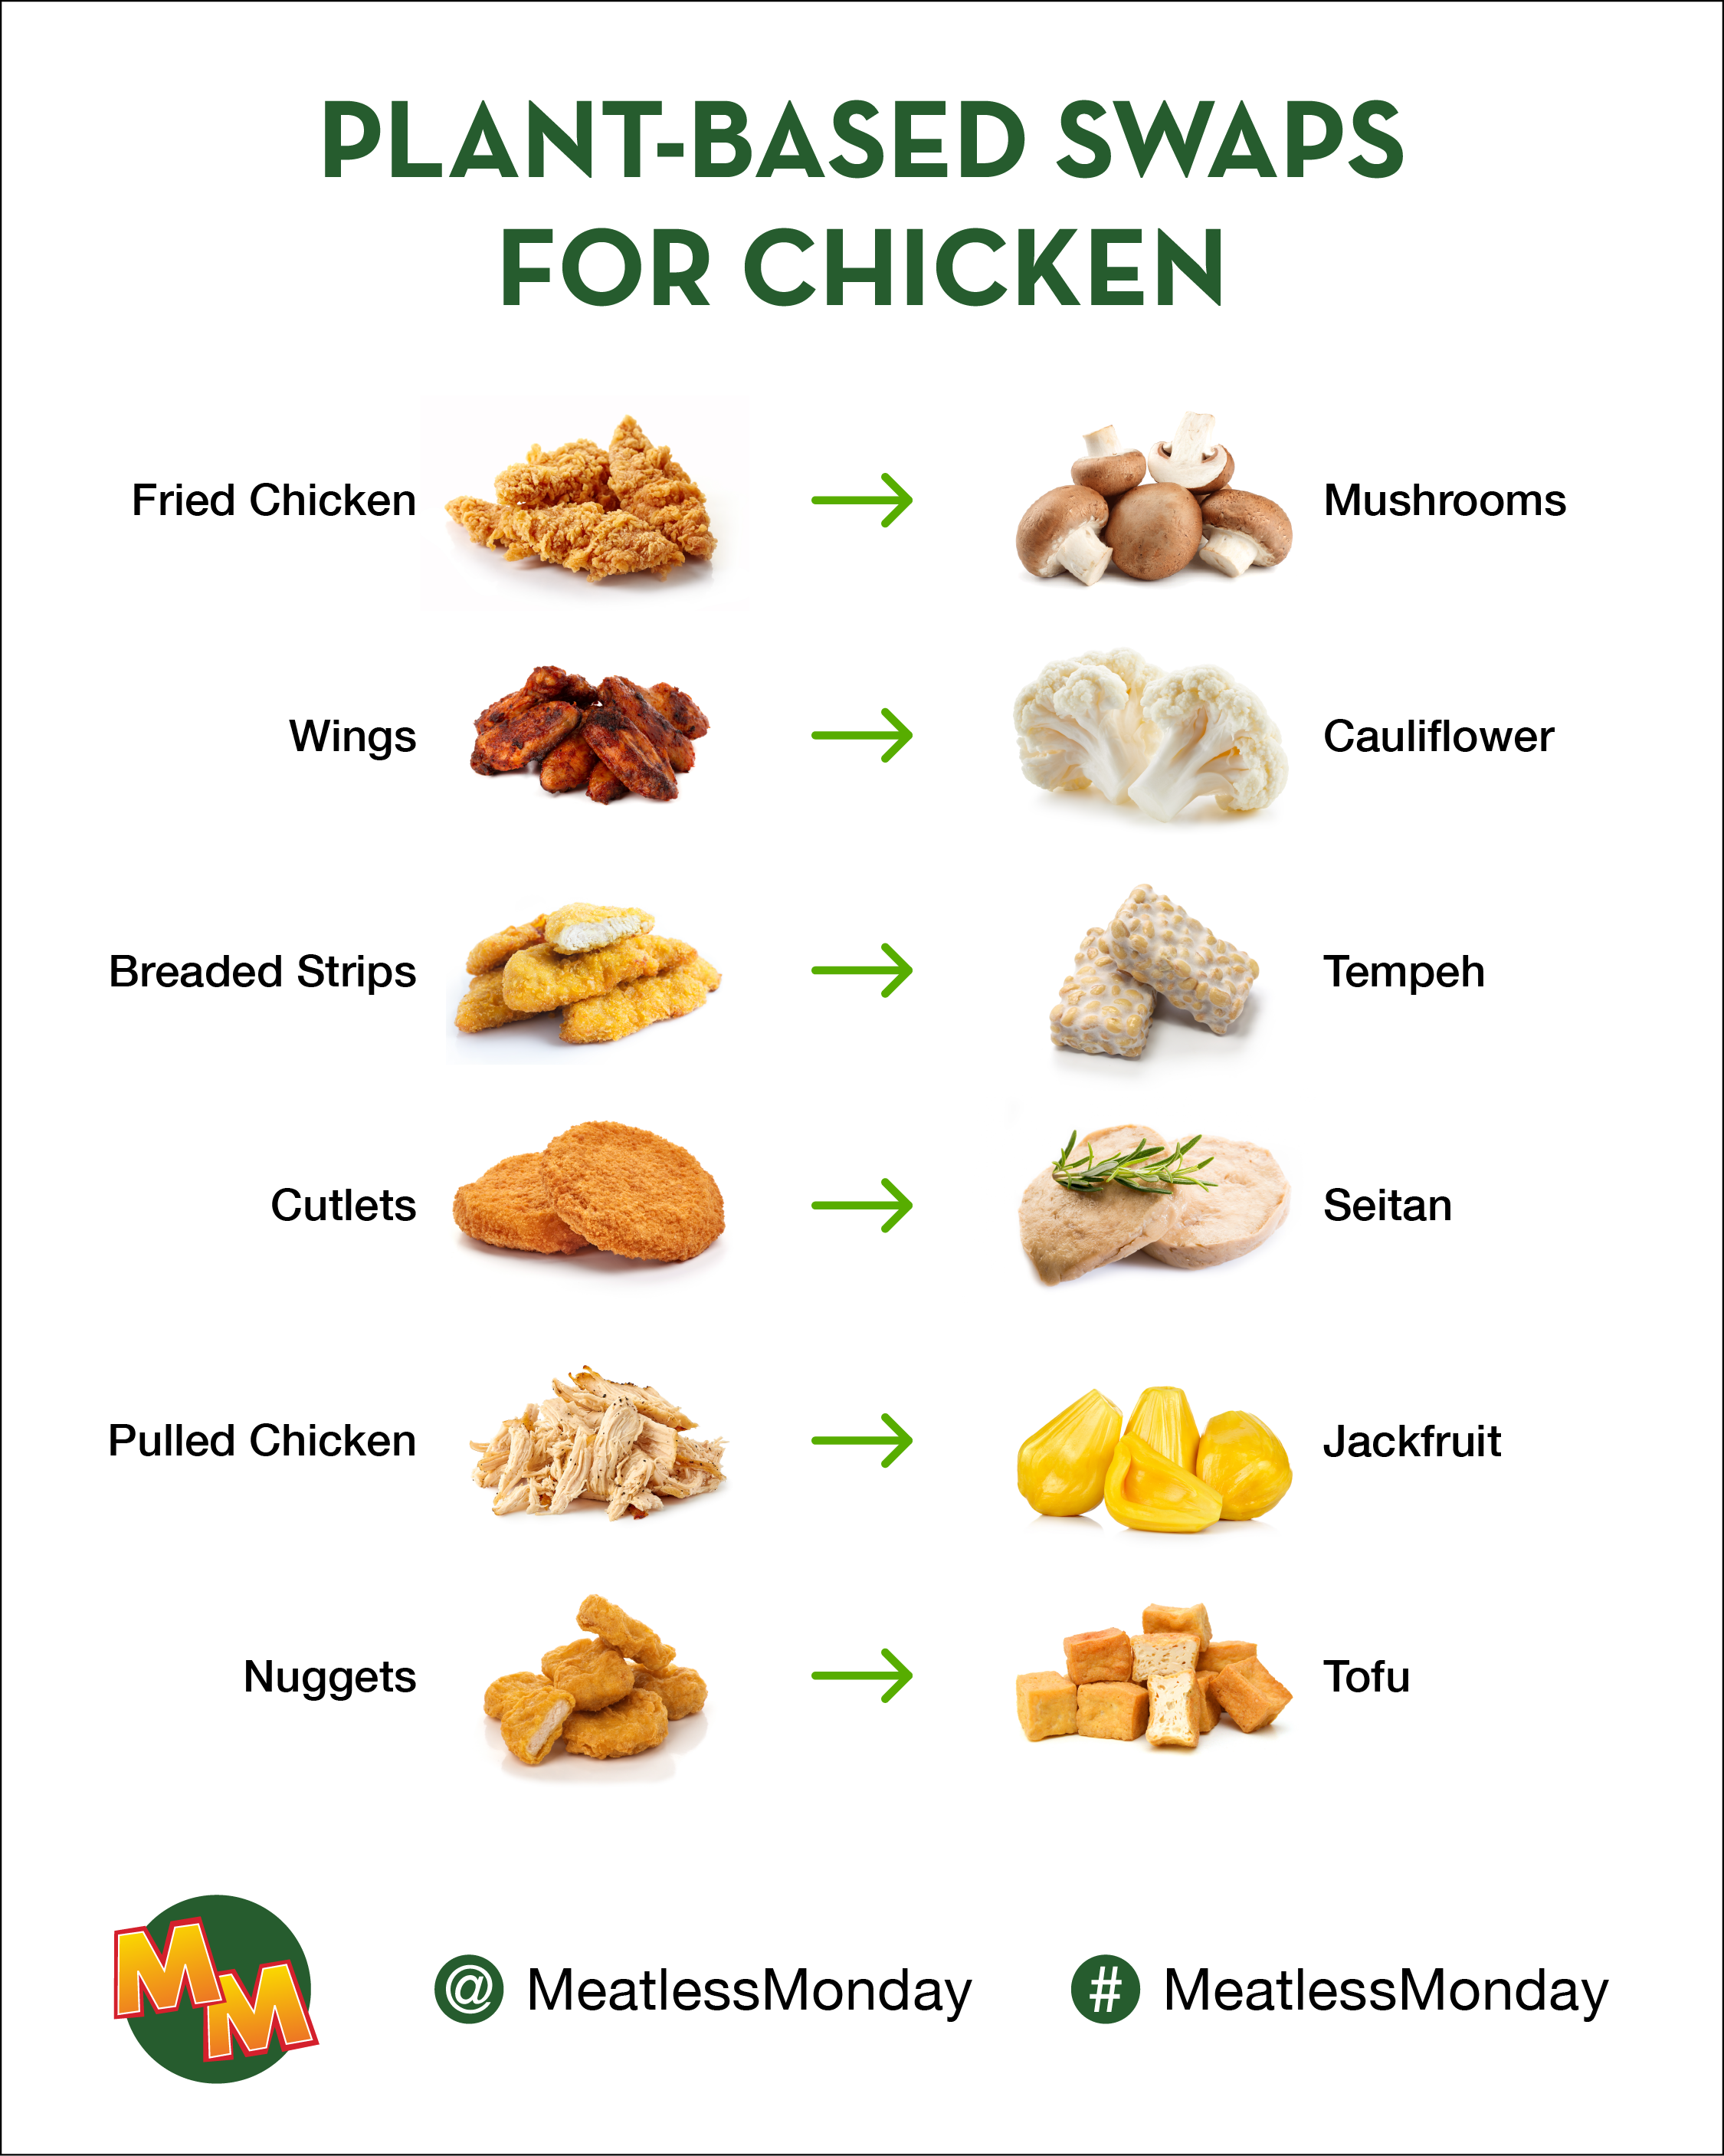 Plant-based swaps for chicken